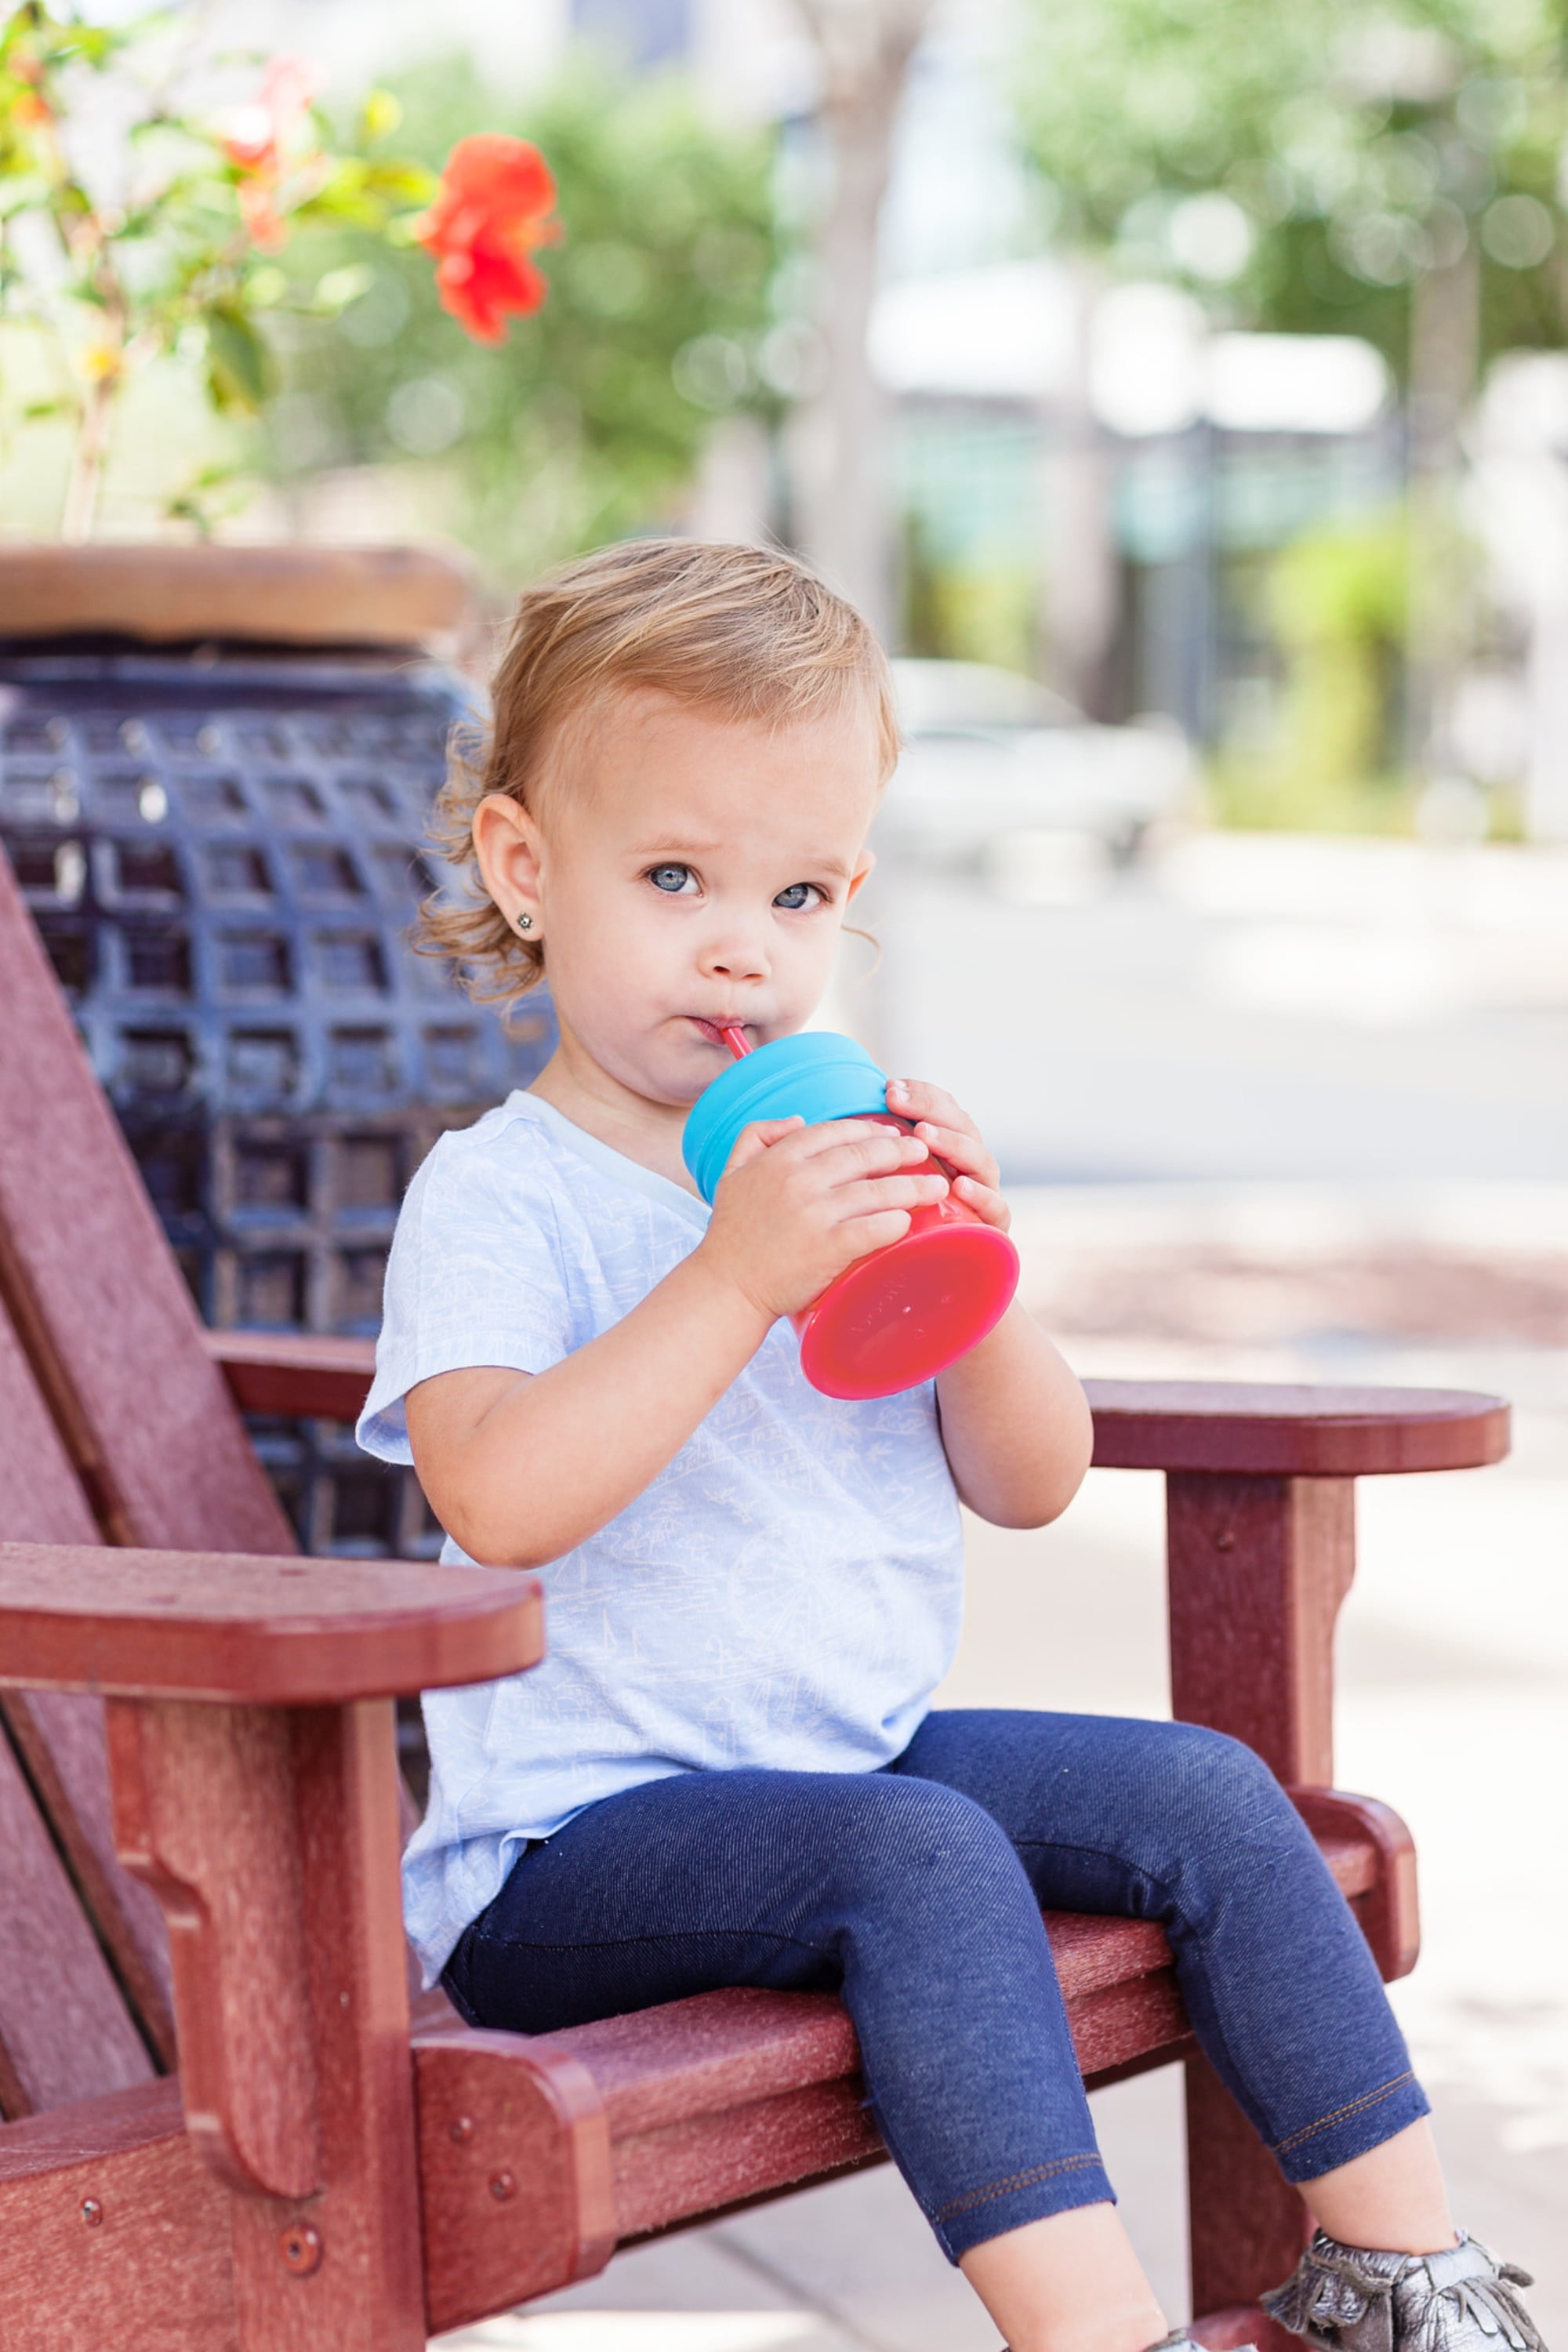 Boon Swig Flip Top Straw Sippy Cup 10 oz - Blue/Green – Abytoys